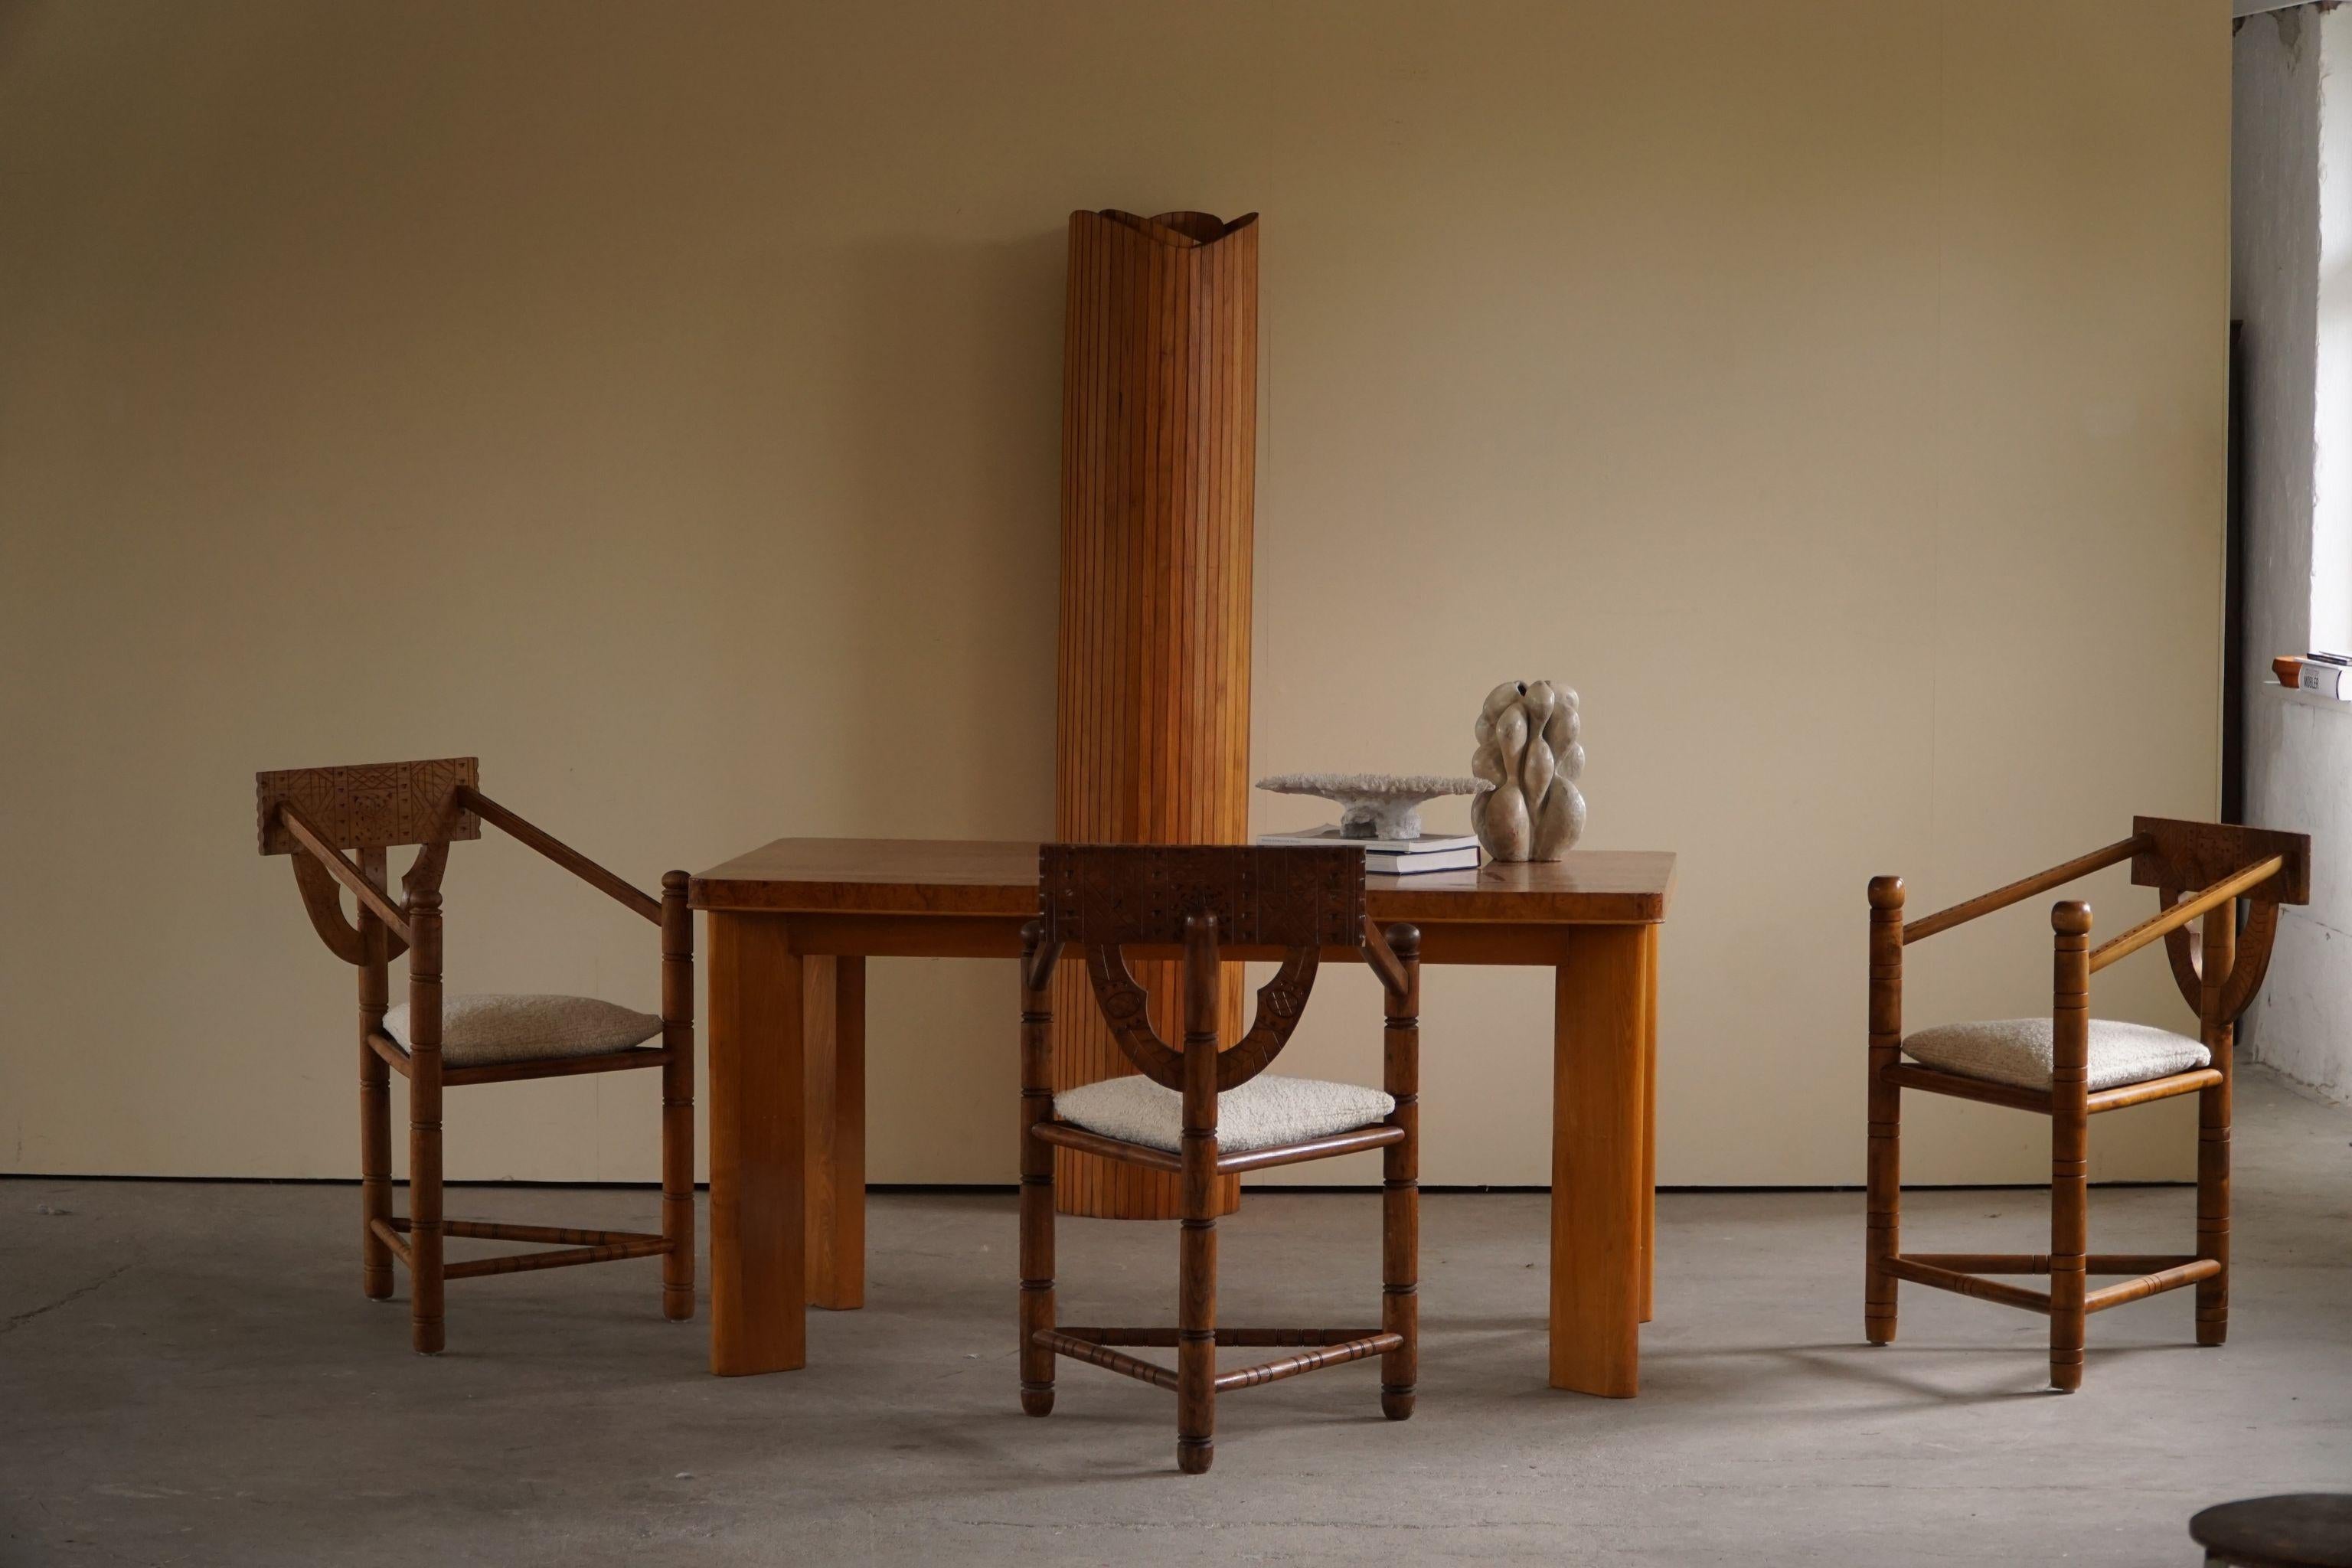 Set of 6 Swedish Monk Chairs with Bouclé Seats, Wabi Sabi, Early 20th Century For Sale 16